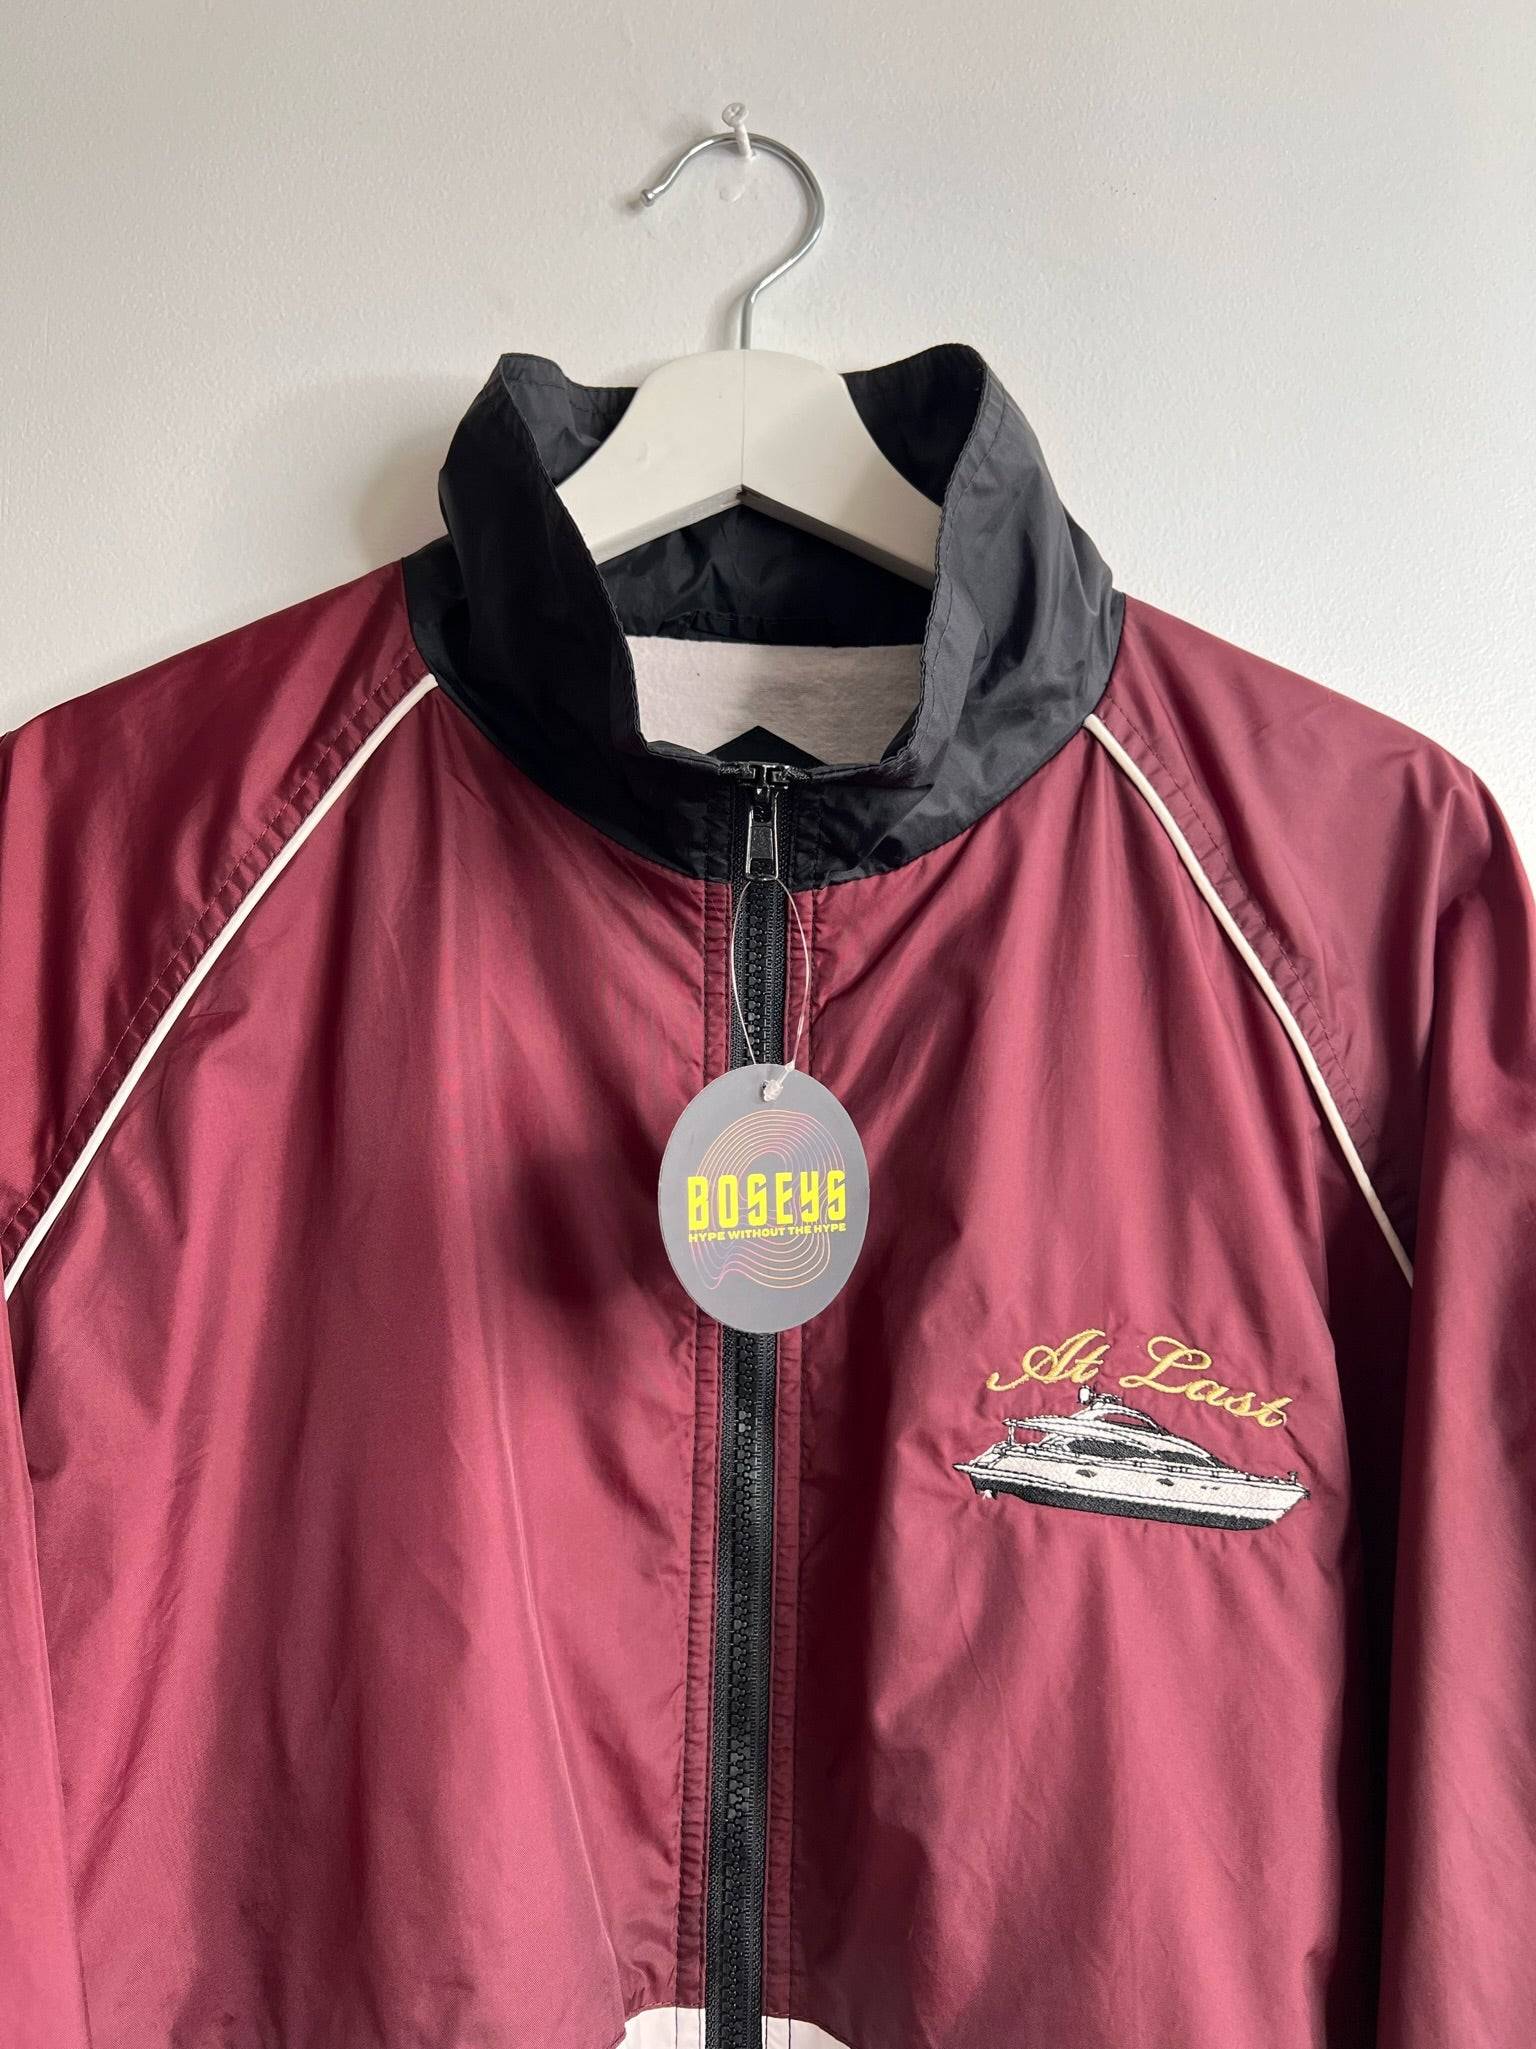 Sport Tex by Port Authority Maroon and Black windbreaker | Fits Upto XL